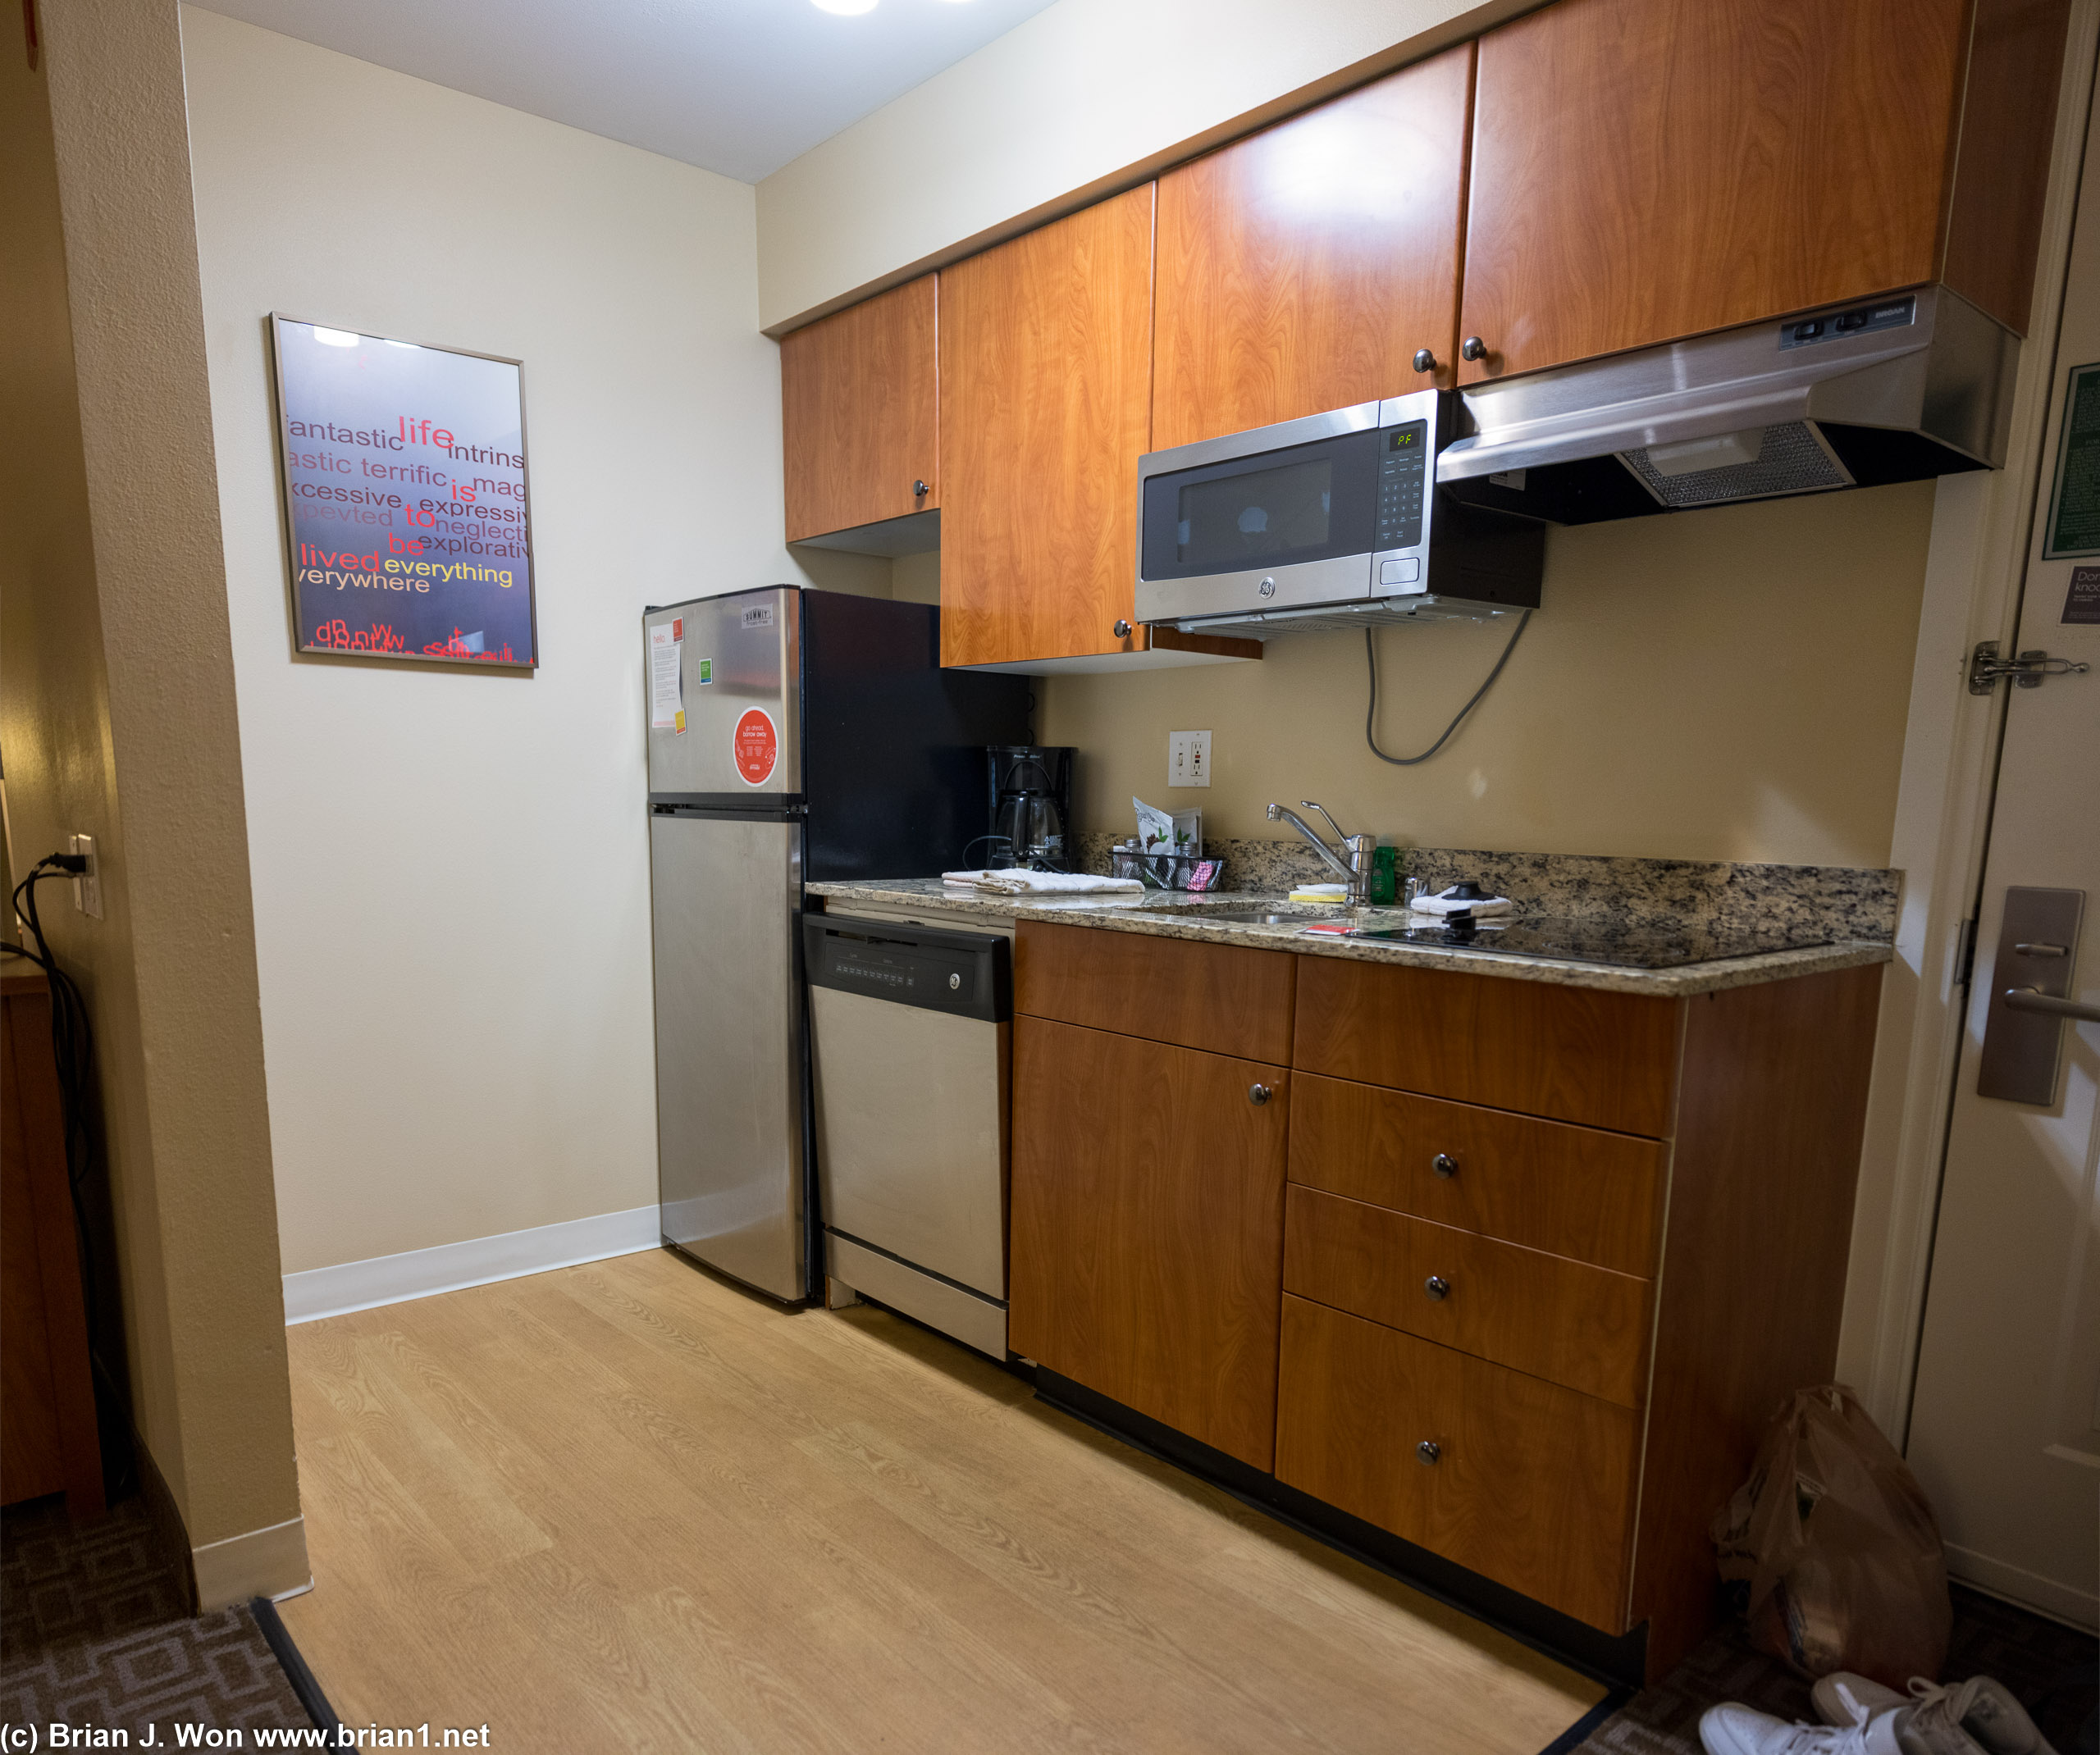 Kitchenette at the local TownePlace Suites